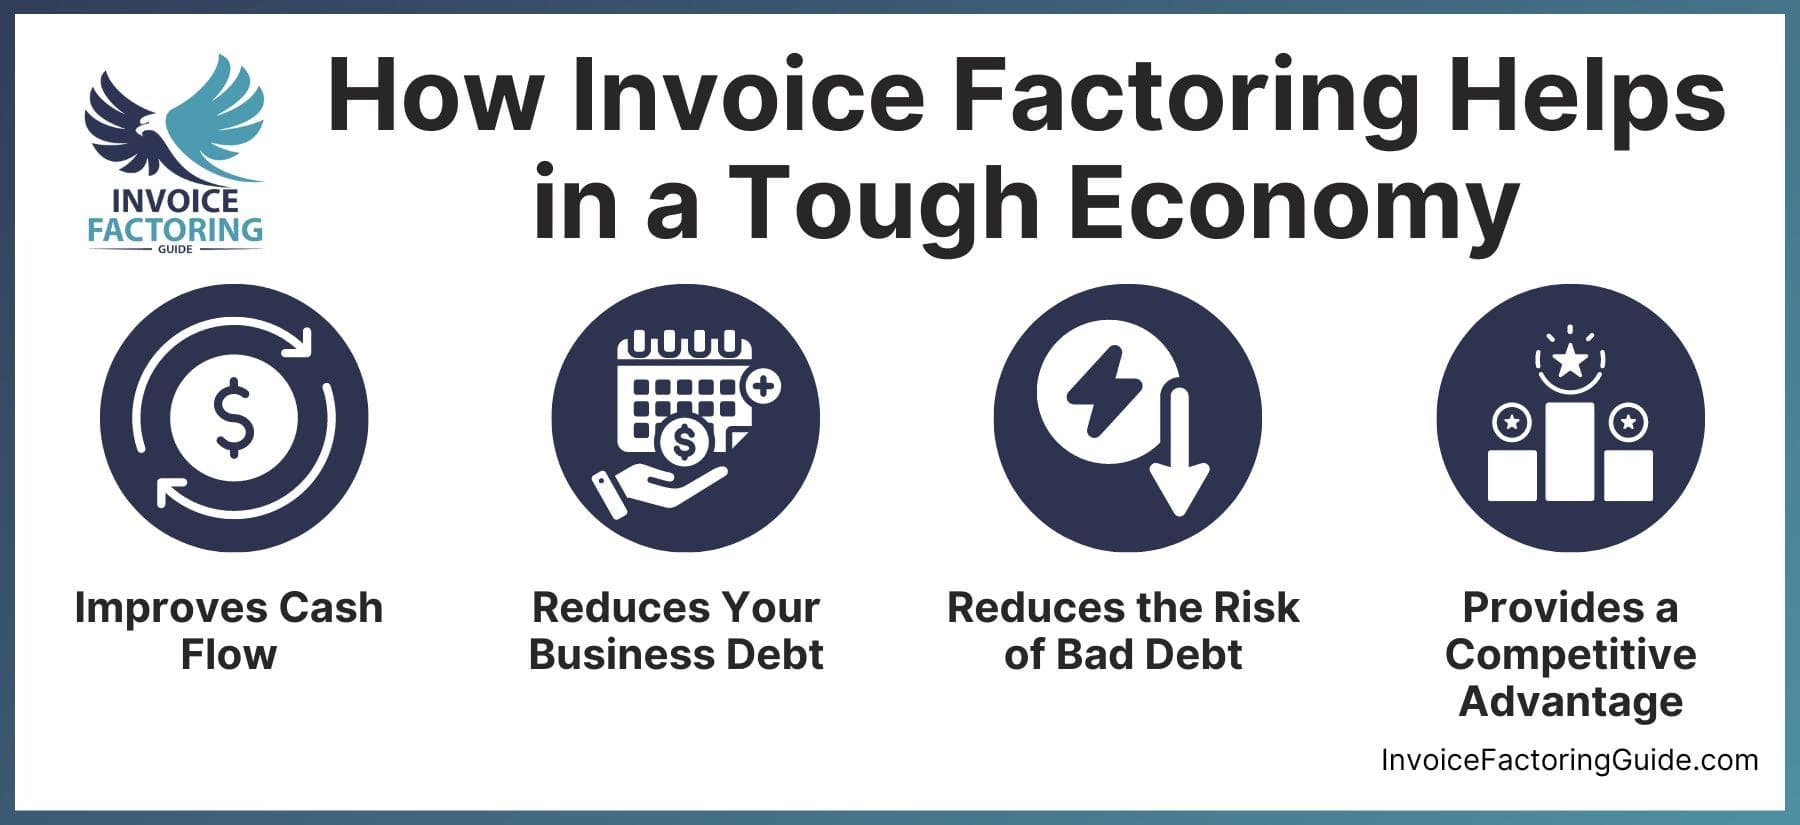 How Invoice Factoring Helps in a Tough Economy